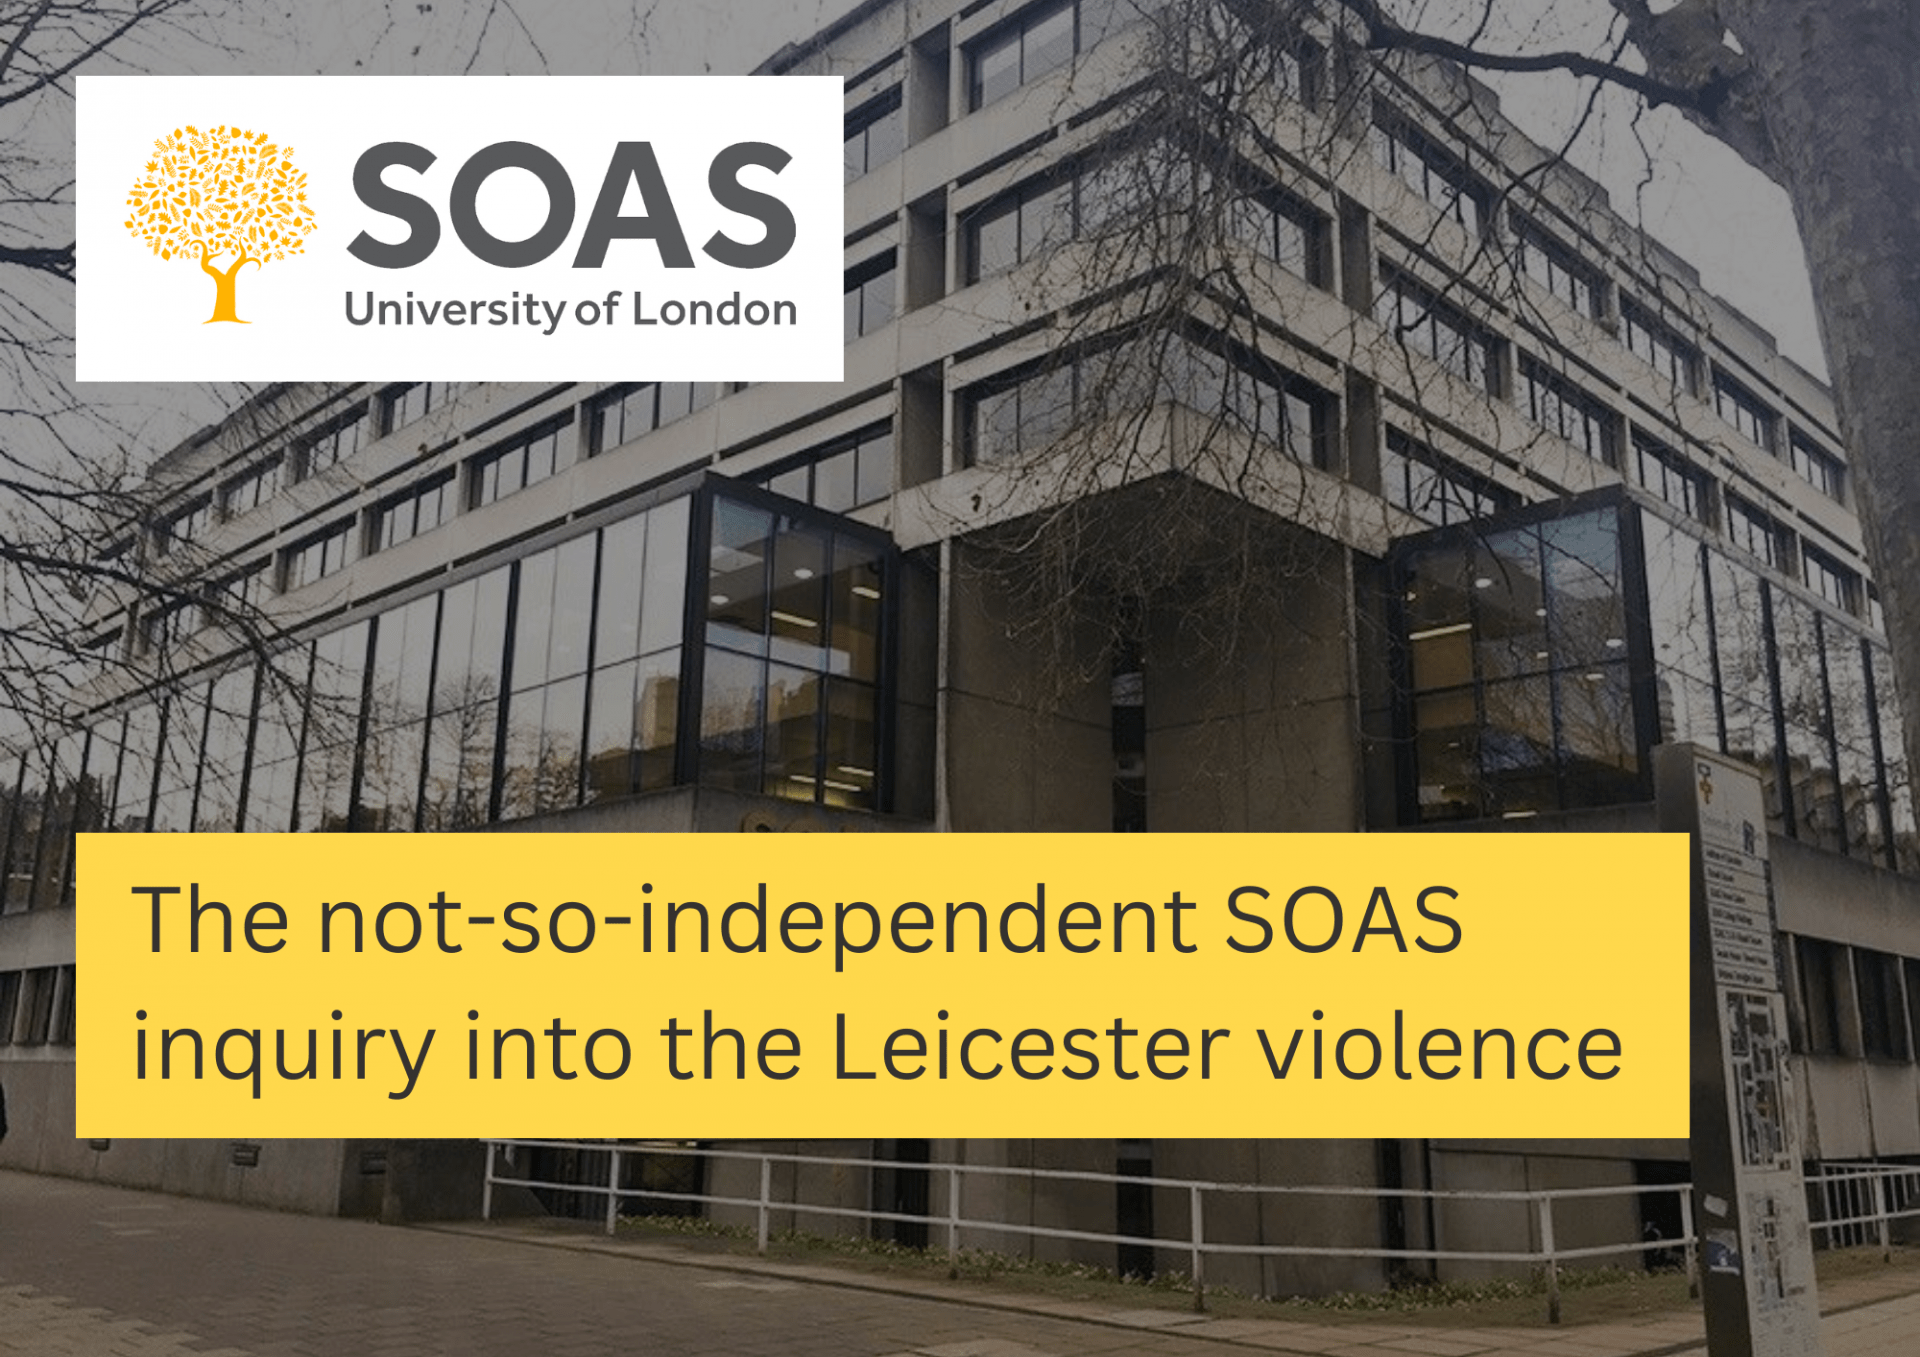 The not-so-independent SOAS inquiry into the Leicester violence